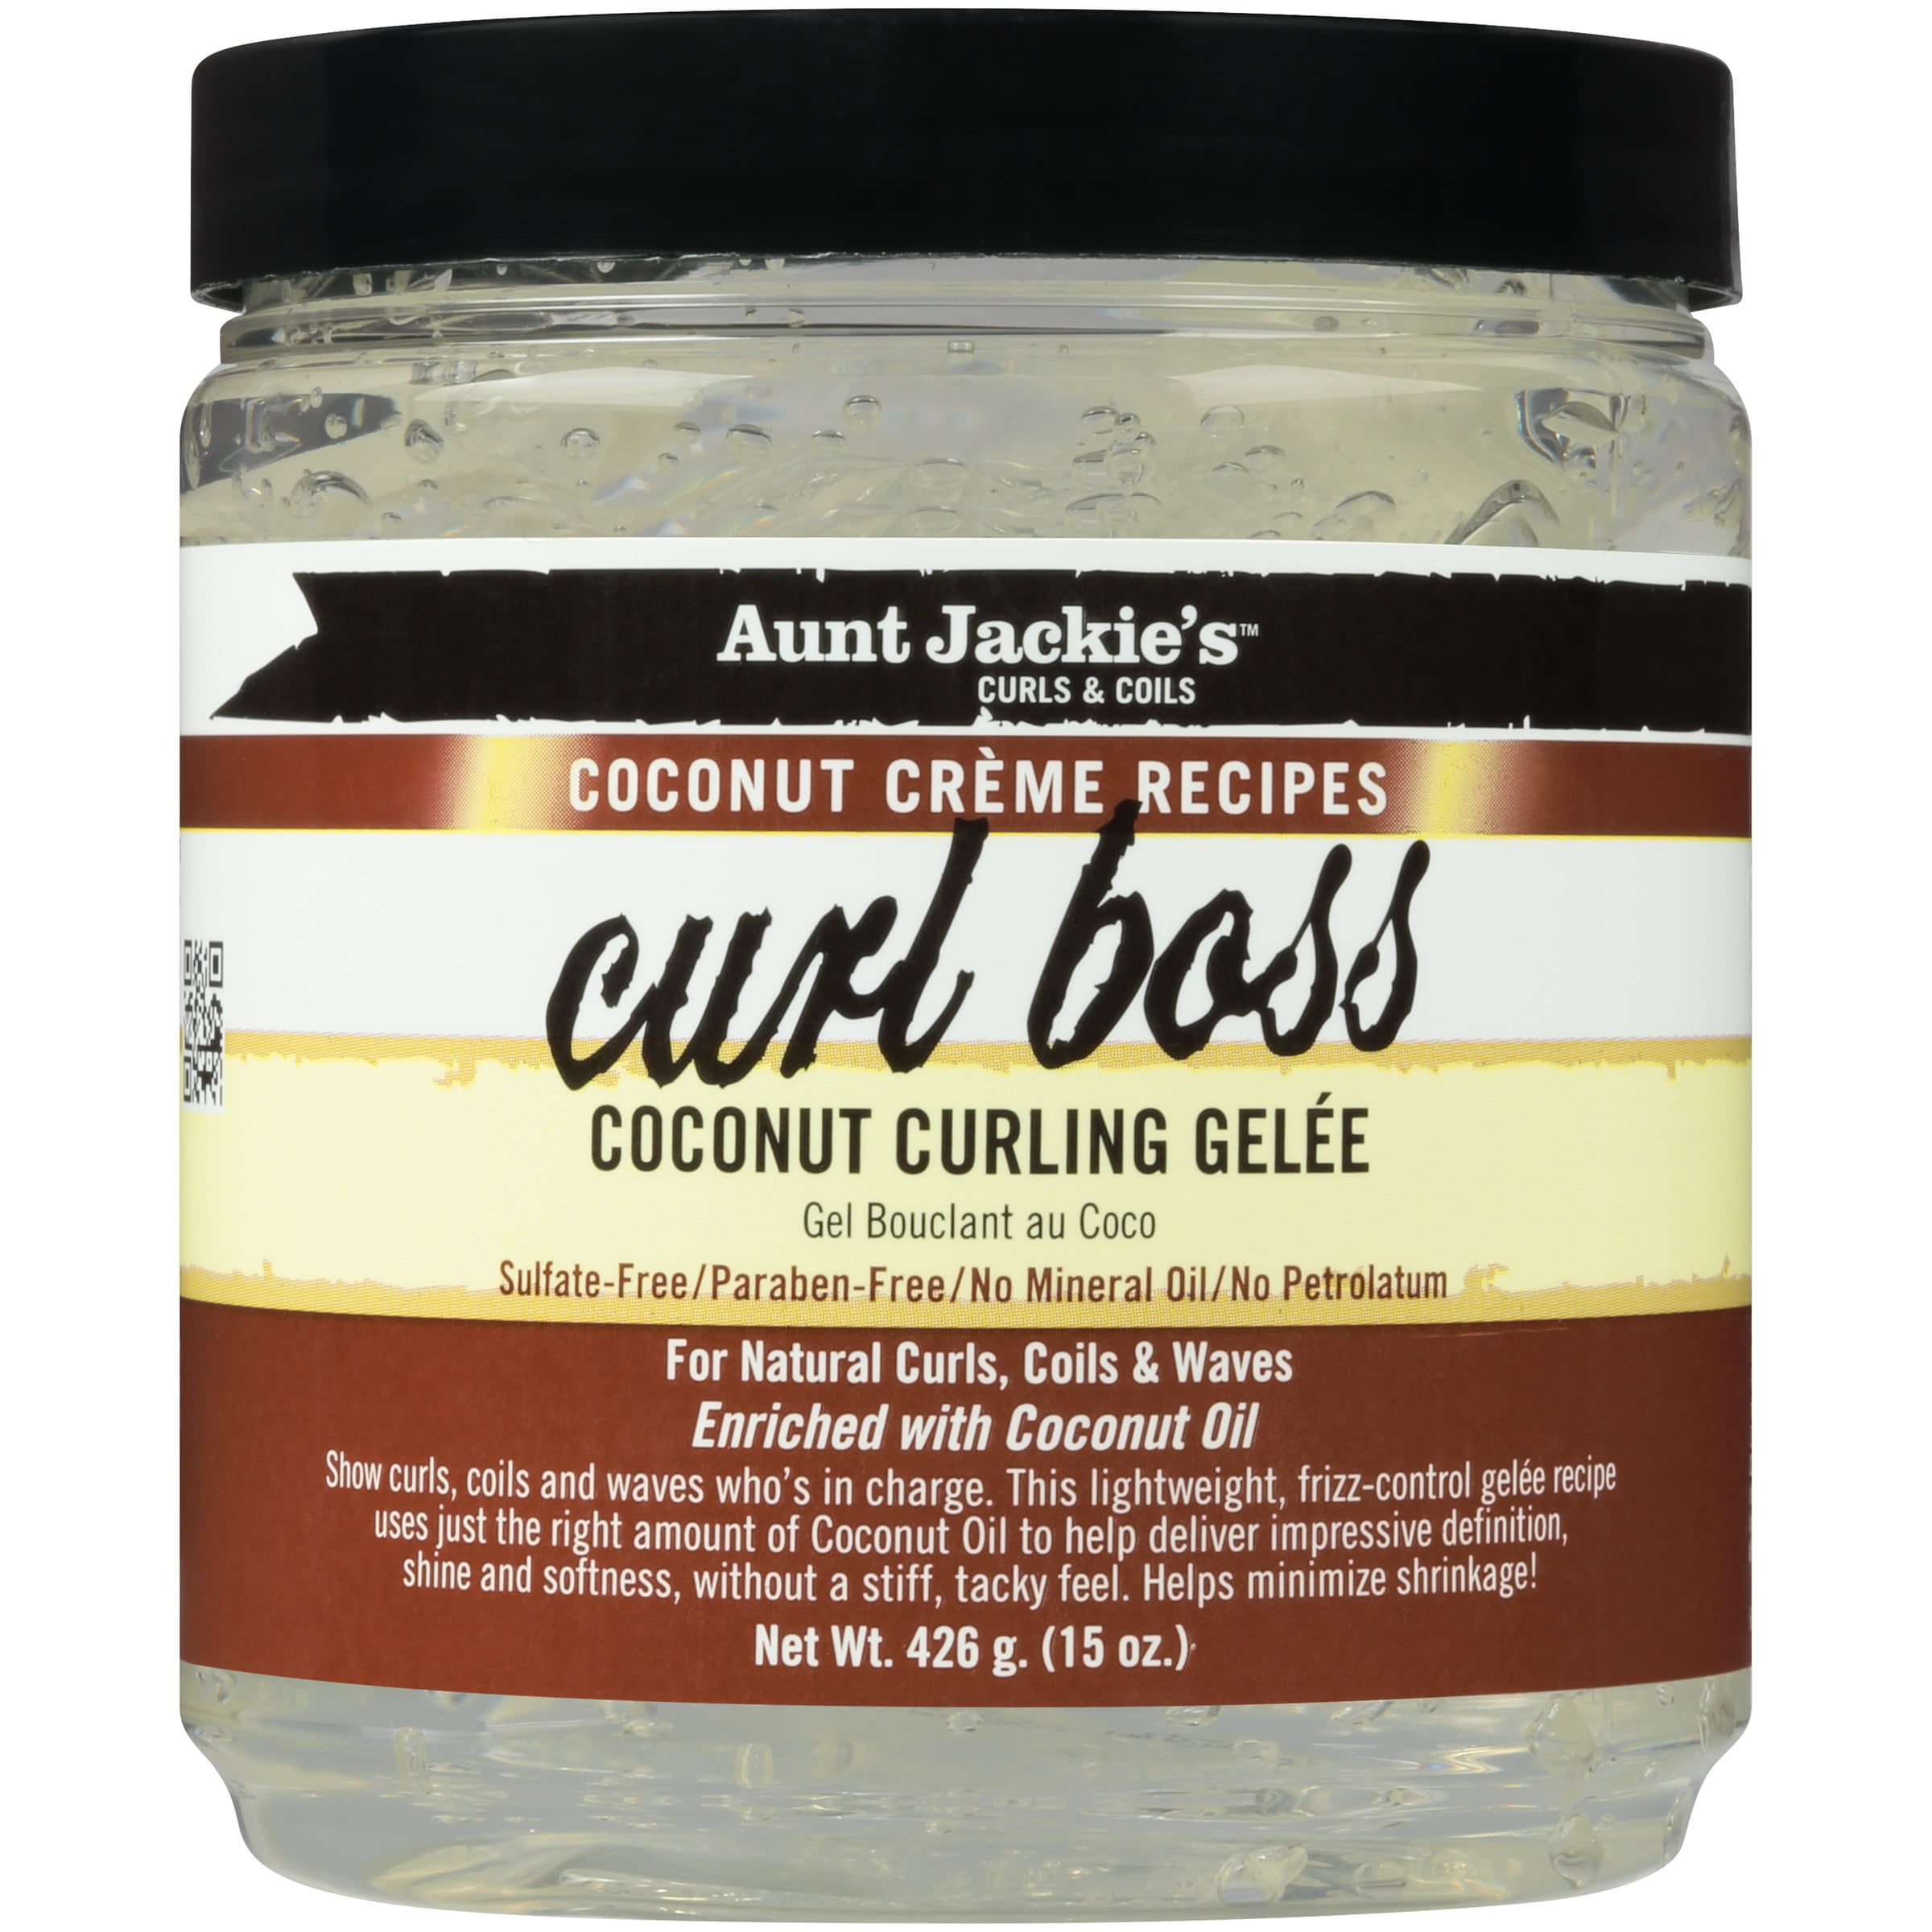 Aunt Jackie's Curls & Coils Shine Enhancing Jar Hair Styling Gel with Coconut Oil, 15 oz